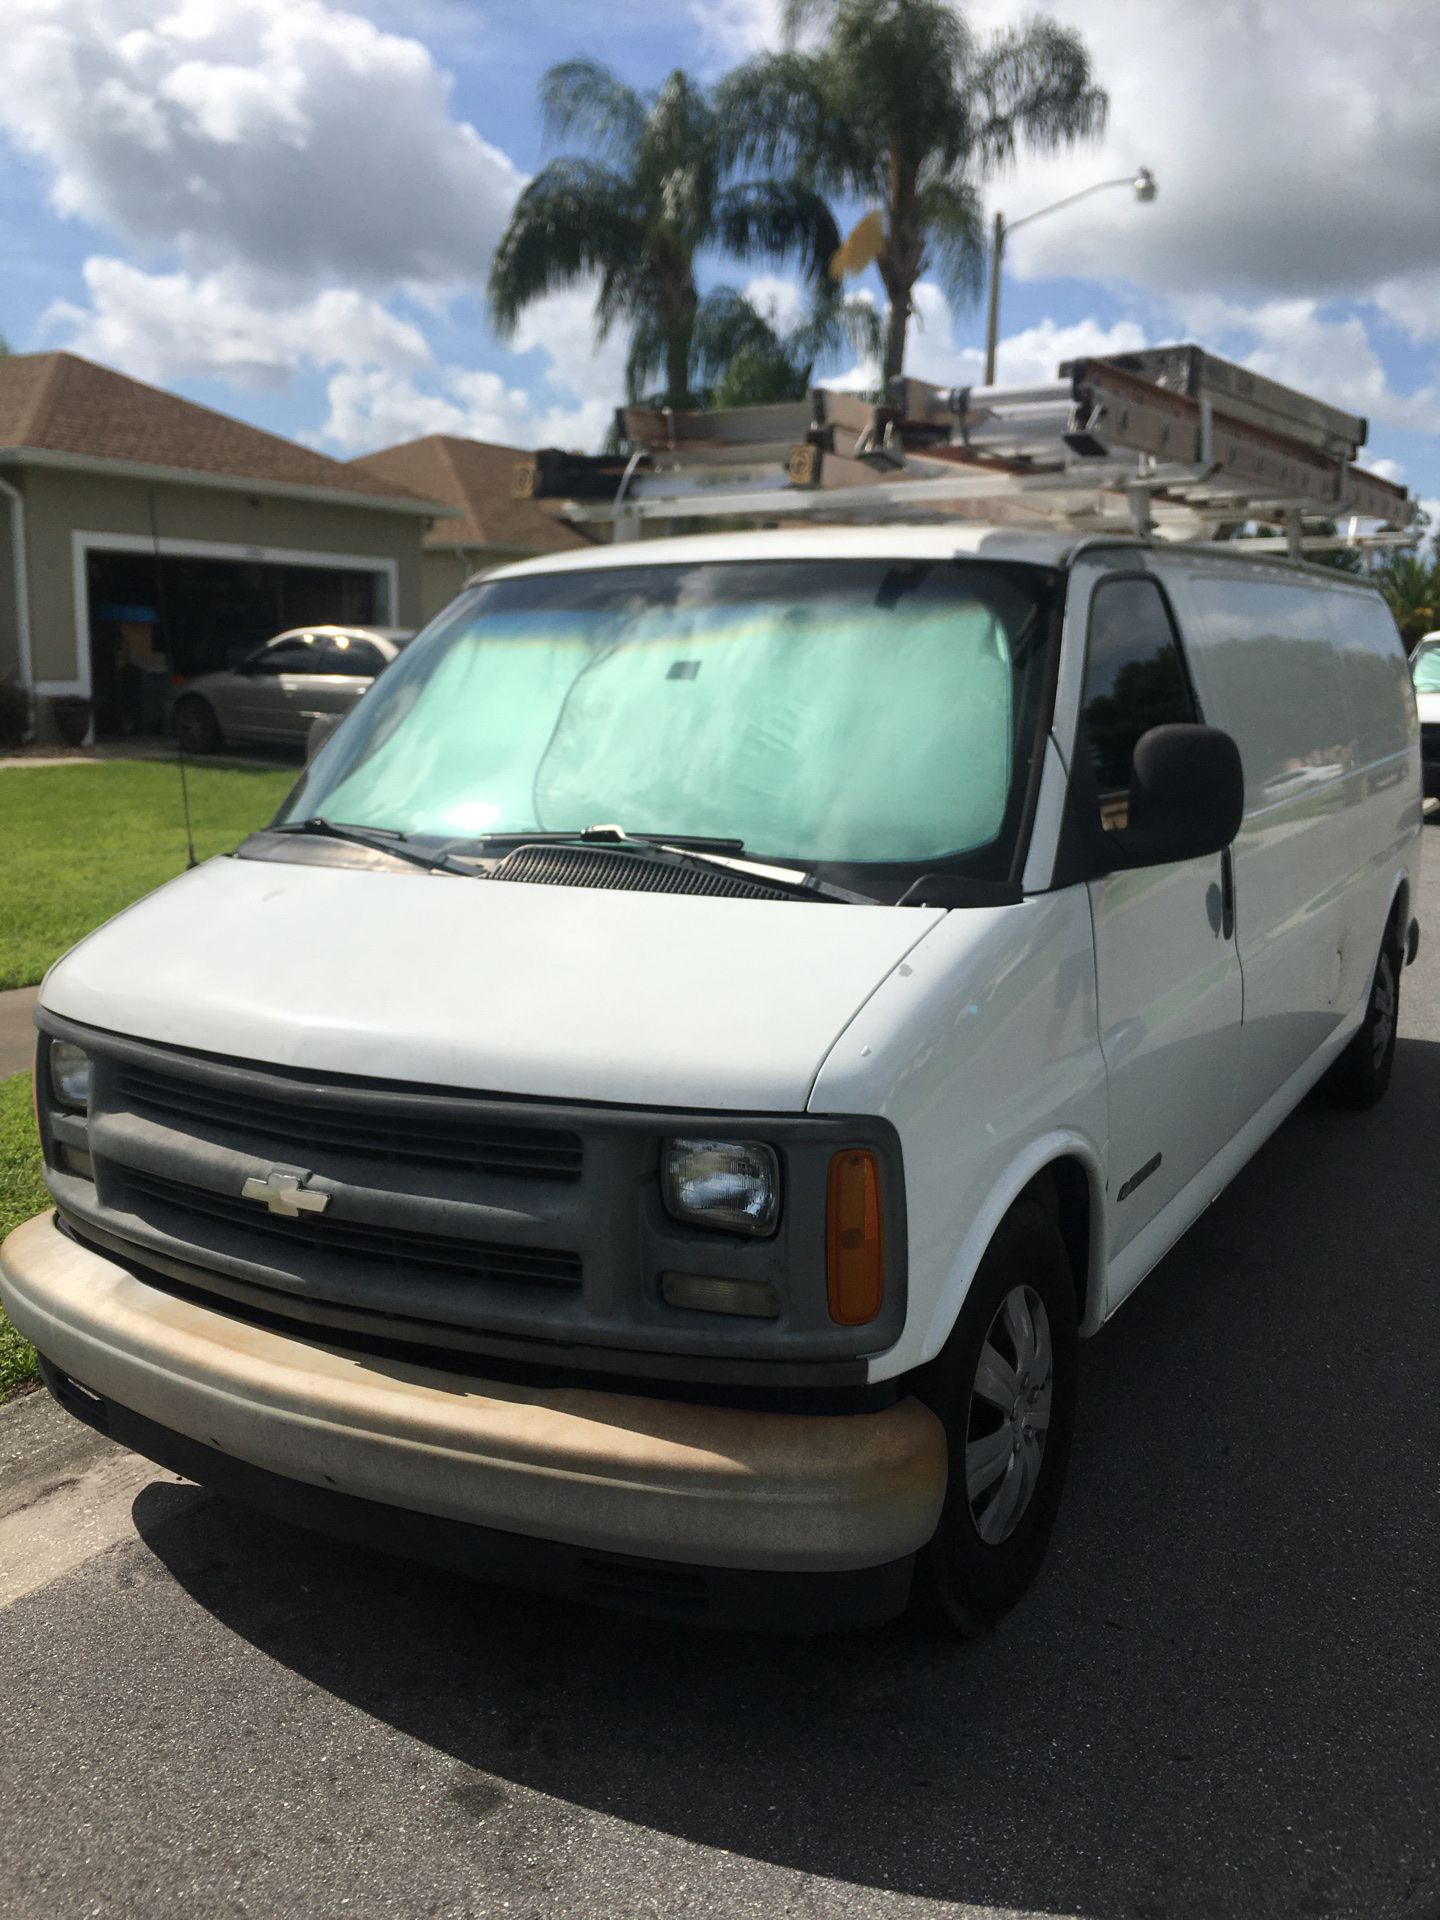 2001 Chevy express 2500 with extra items !!!!!